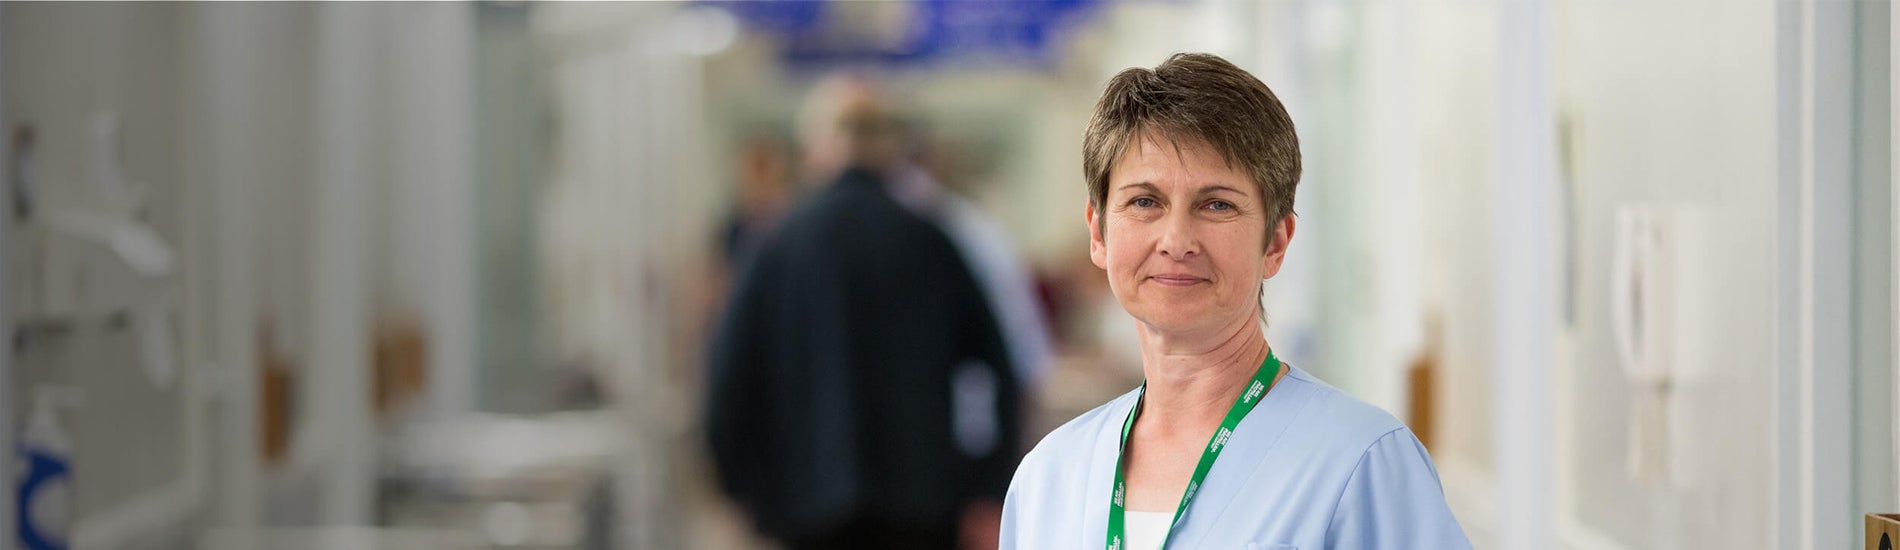 Macmillan Cancer Support case study